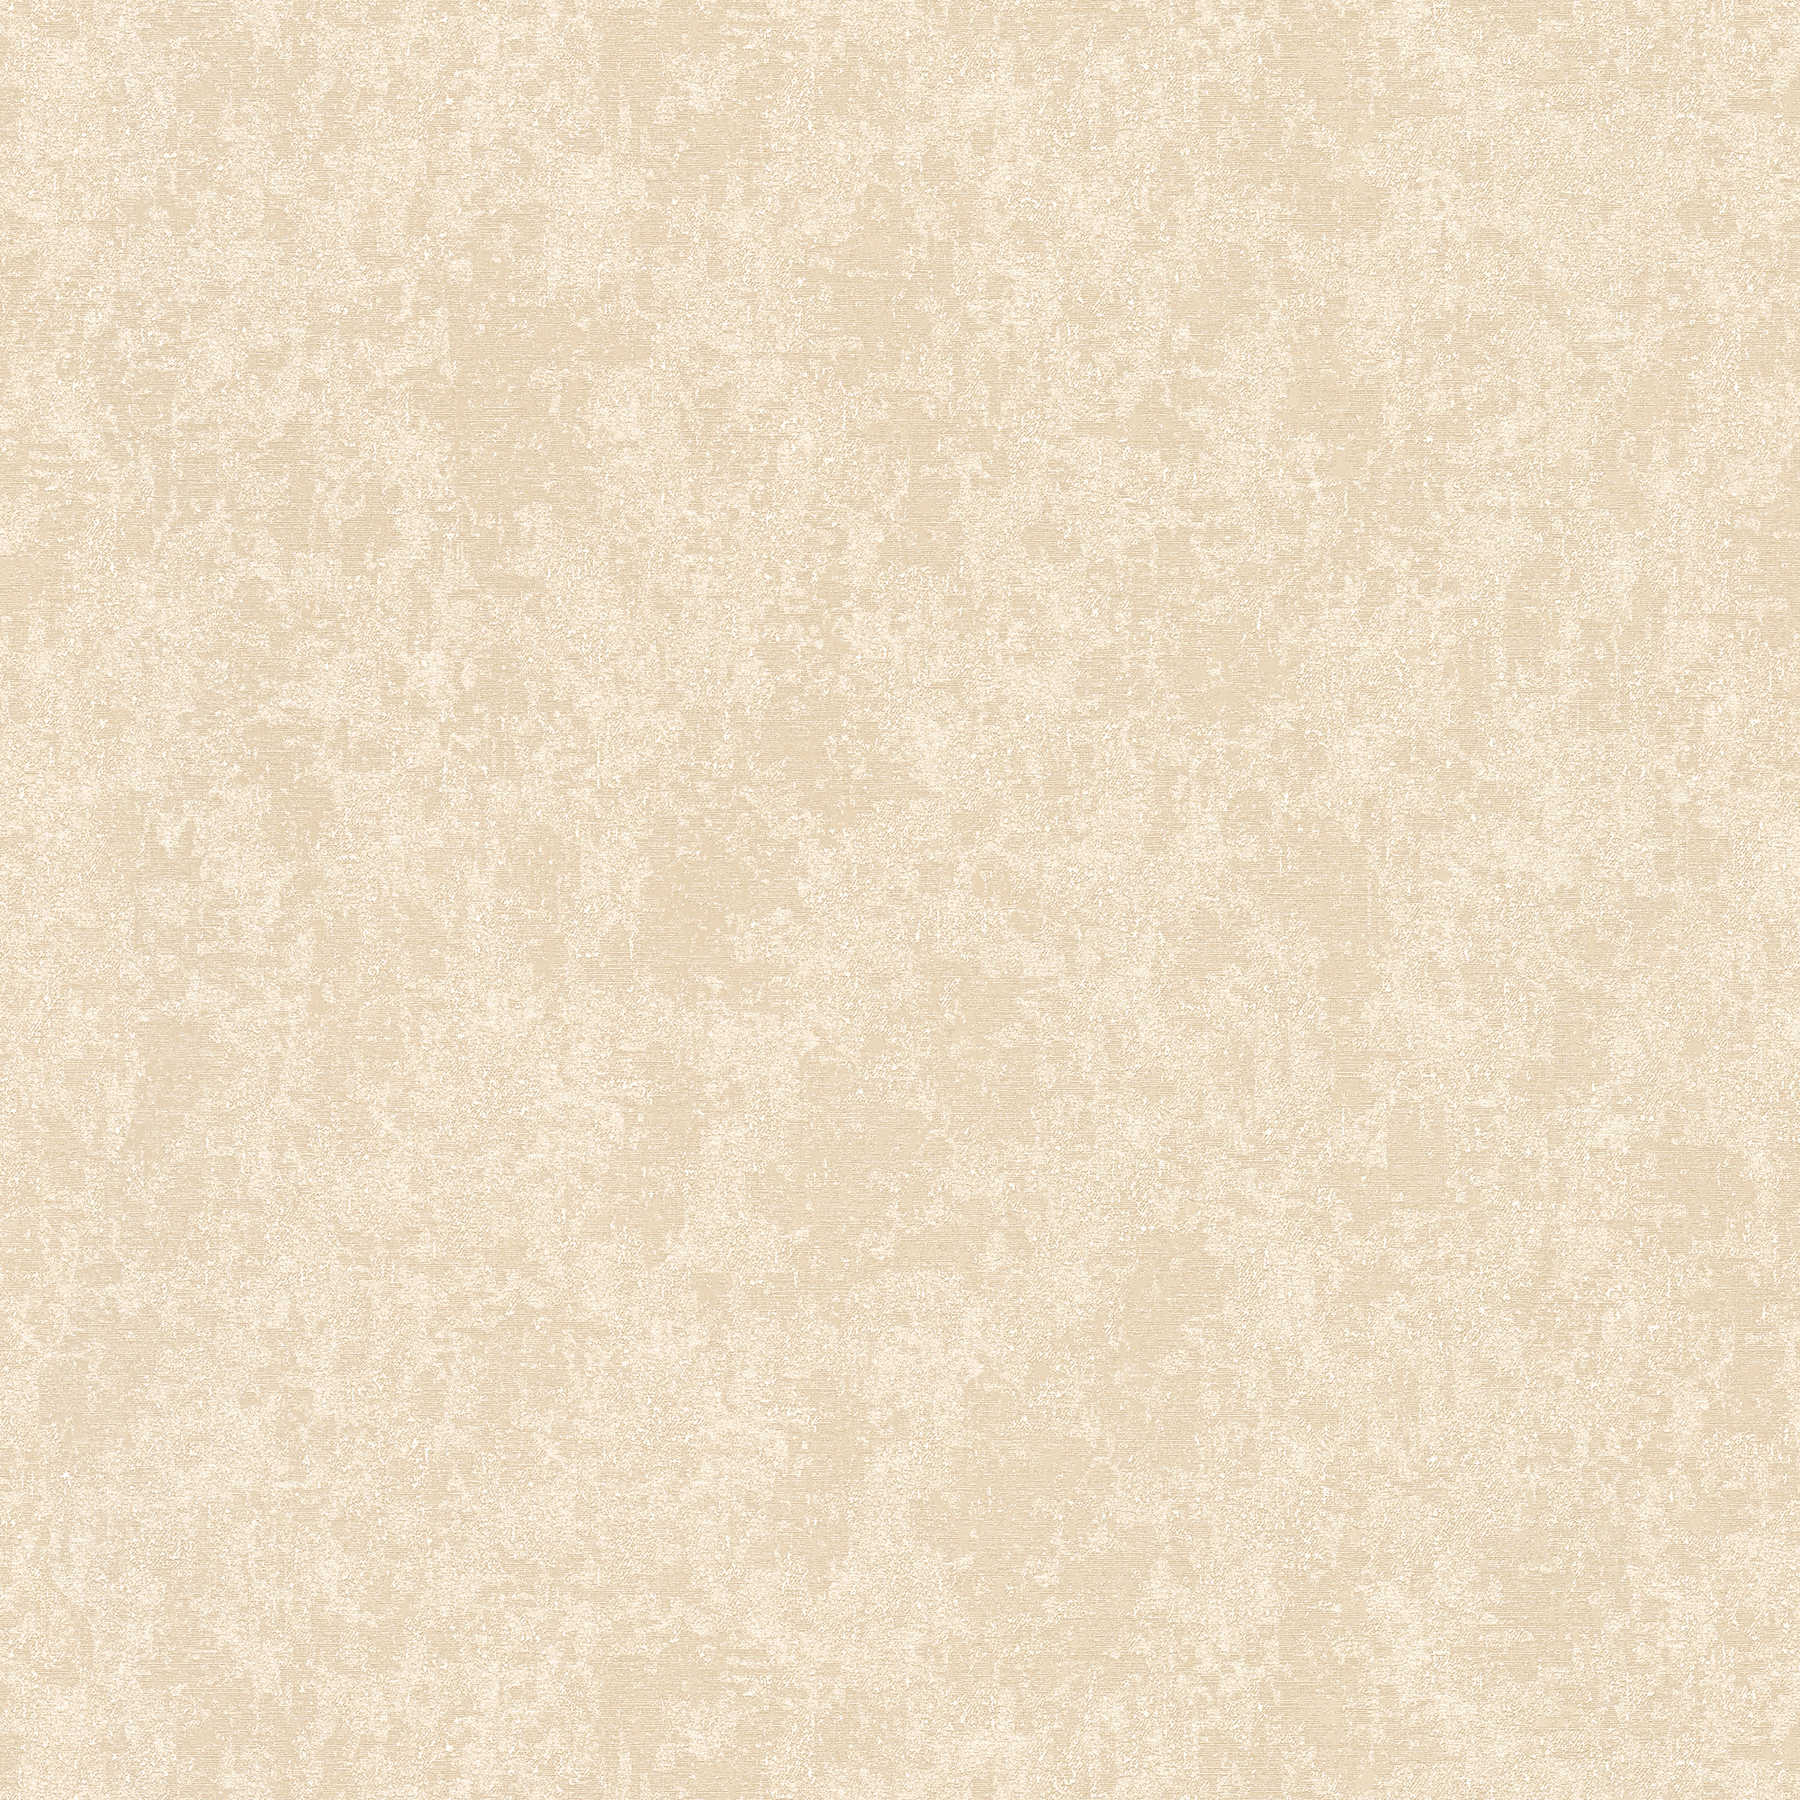 Beige plaster look wallpaper in classic style with mottled colour
